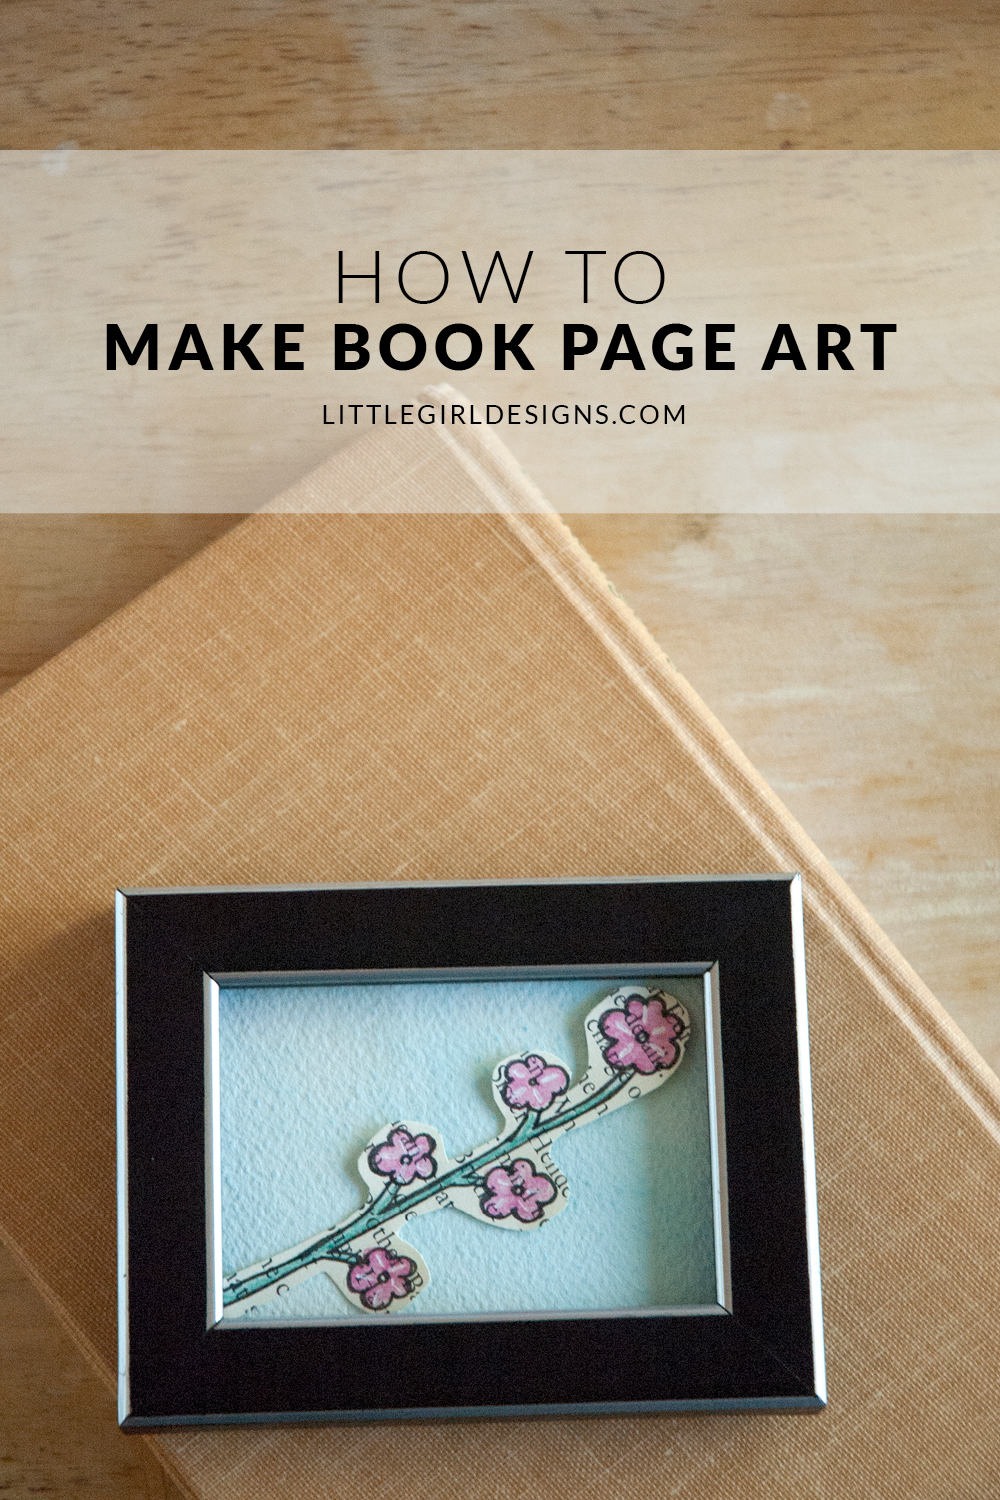 How to Make Book Page Art - Use pages from an old book to make this simple craft. This is such a fast craft and you'll love the results! via littlegirldesigns.com